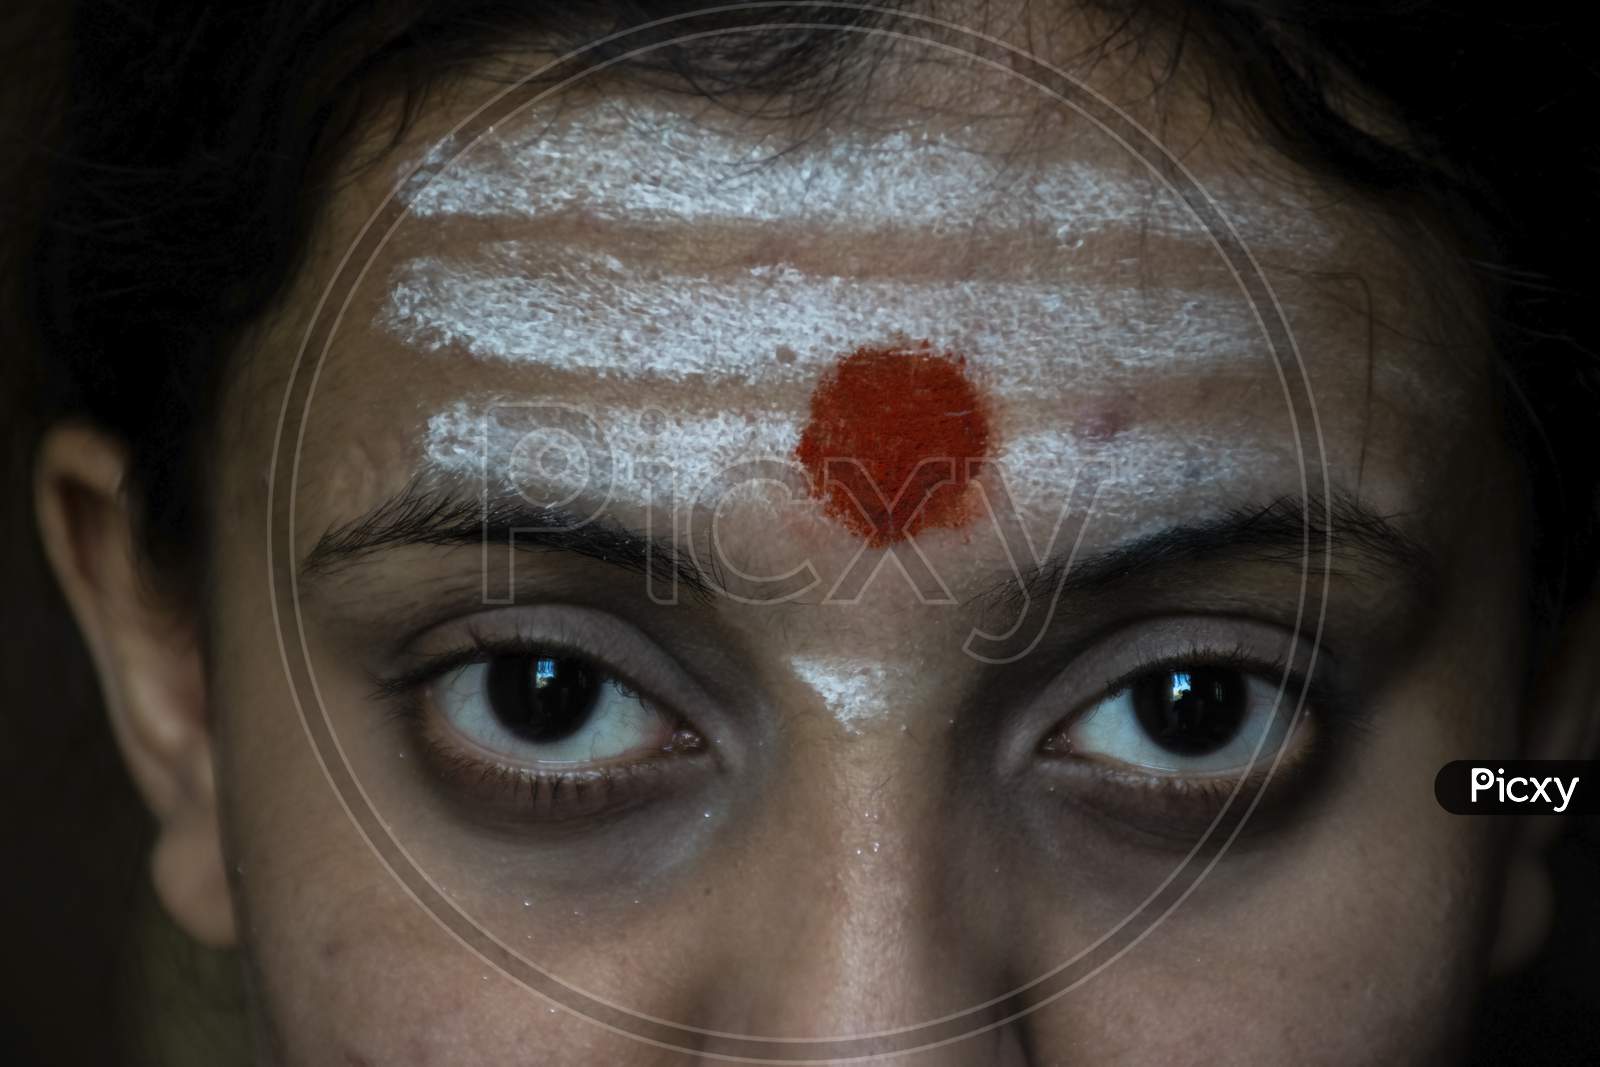 Stock Photo Of A Beautiful 20 To 30 Aged Indian Hindu Girl Who Apply Horizontal White Color Vibhuti And Round Shape Red Color Sindur Tilak Or Vermillion Tilak On Her Forehead Looking At Camera.